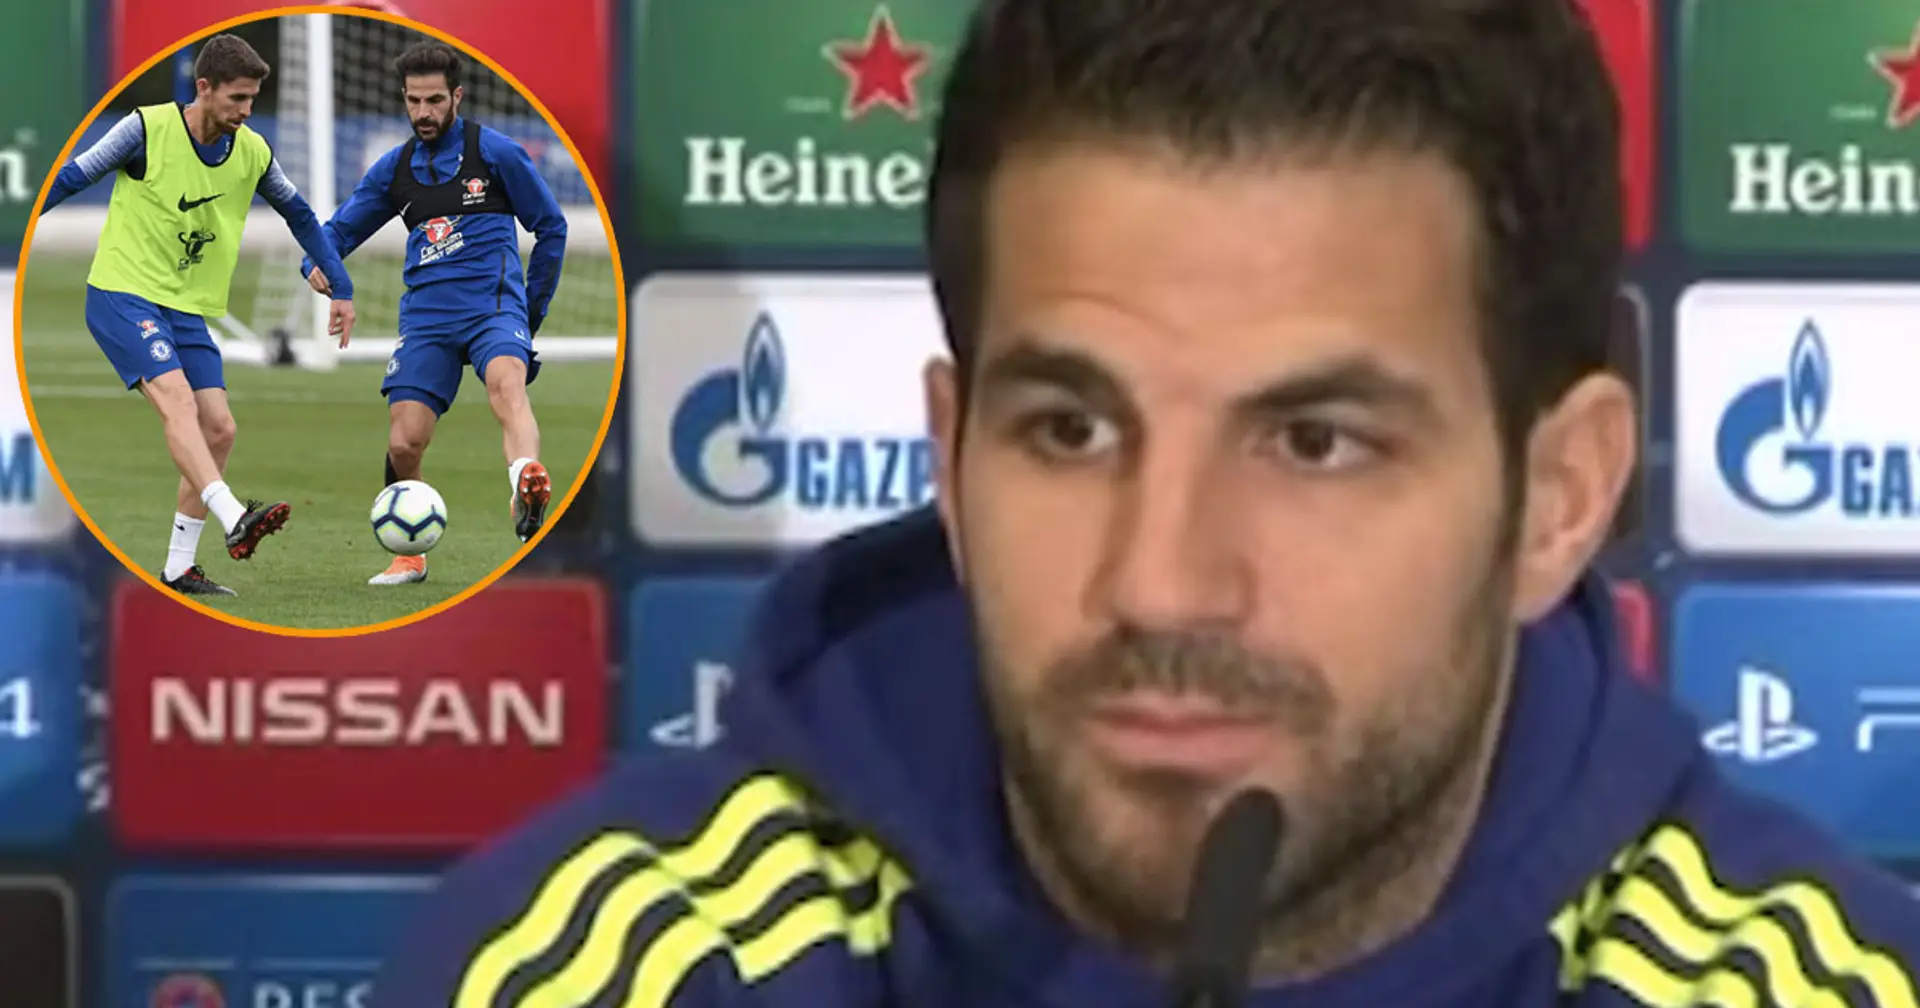 'He was making team tick!': Cesc names player who made him leave Chelsea - he now plays for fierce rivals